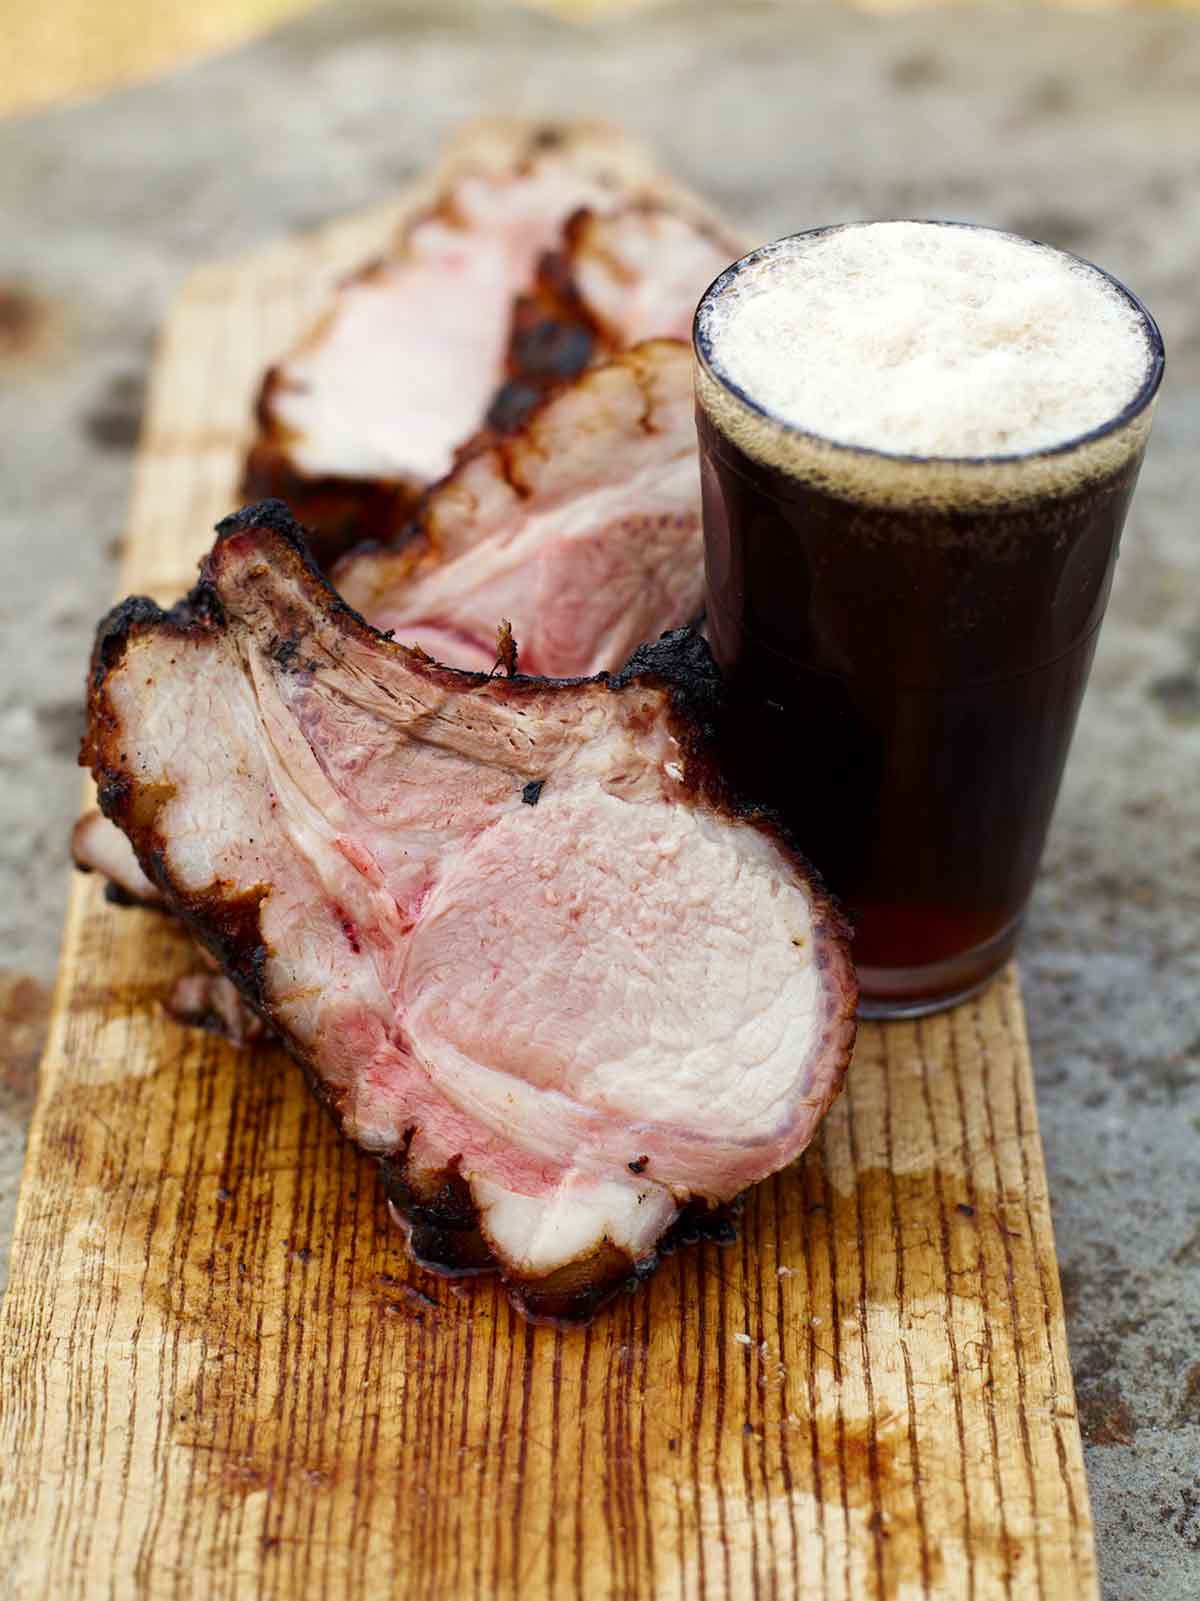 Chops from a spice-glazed grilled pork loin on a cutting board with a glass of stout.